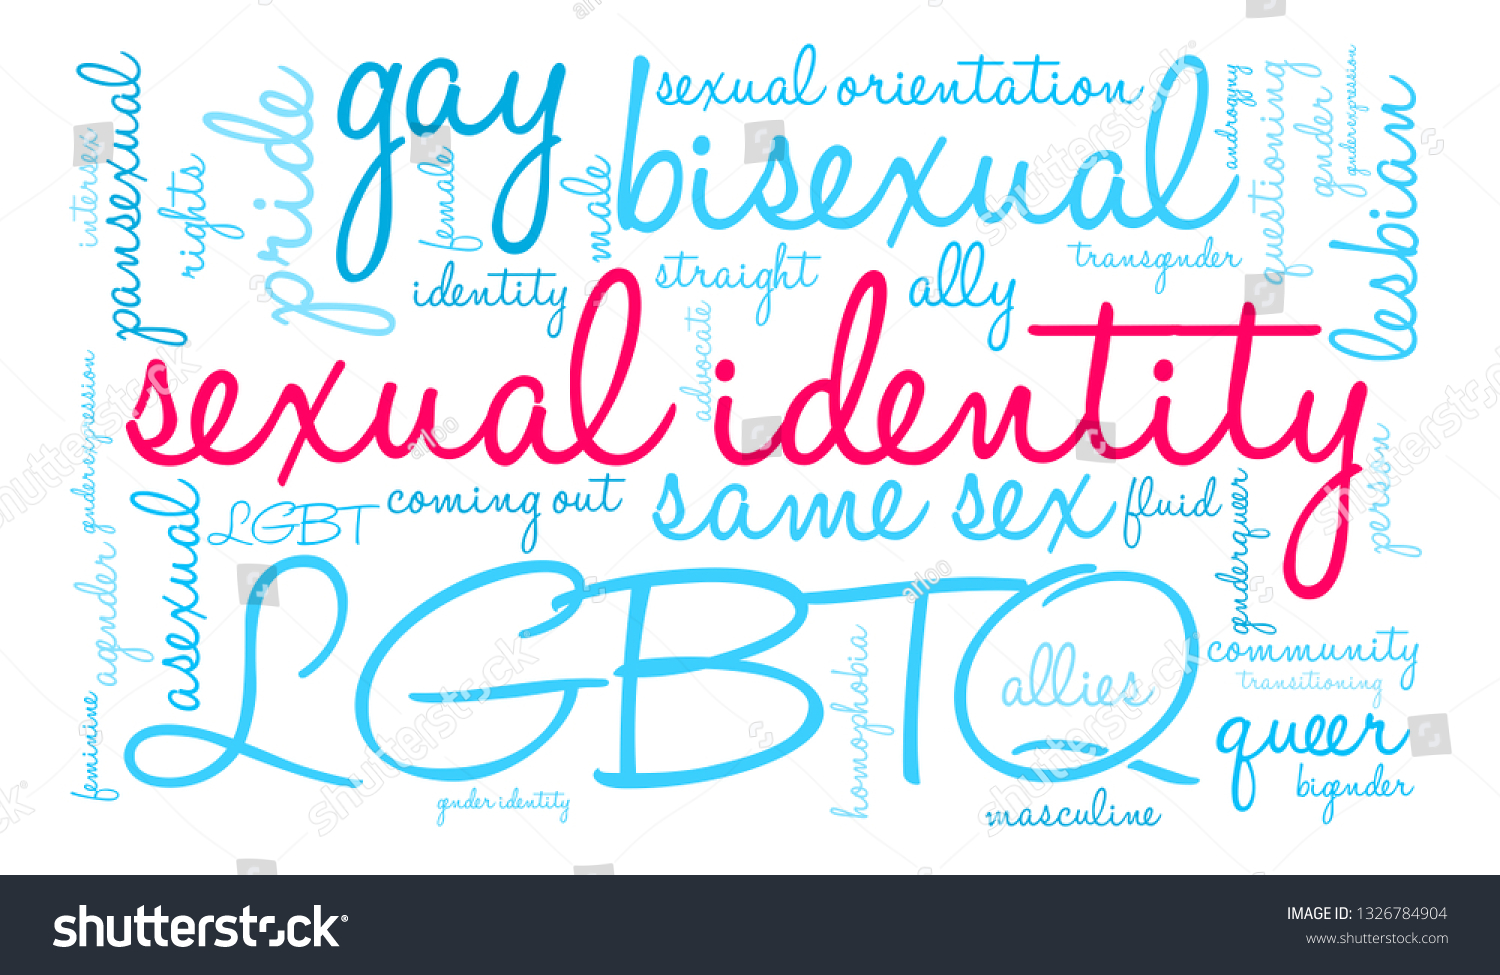 Sexual Identity Word Cloud On A White Background Royalty Free Stock Vector 1326784904 0080